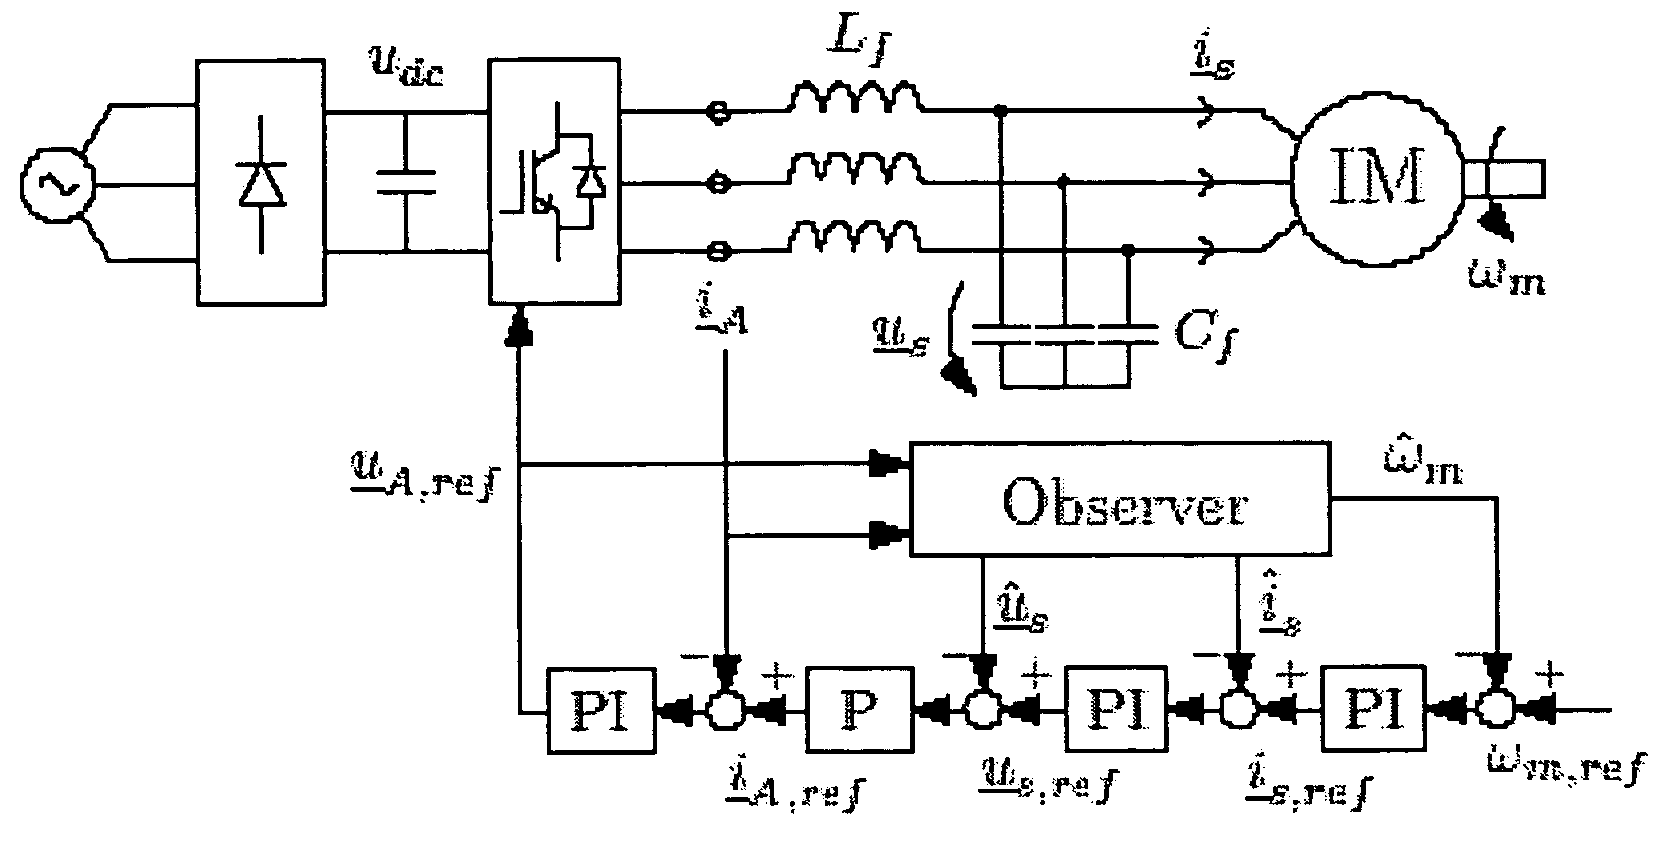 Speed sensorless control of an induction machine using a PWM inverter with output LC filter